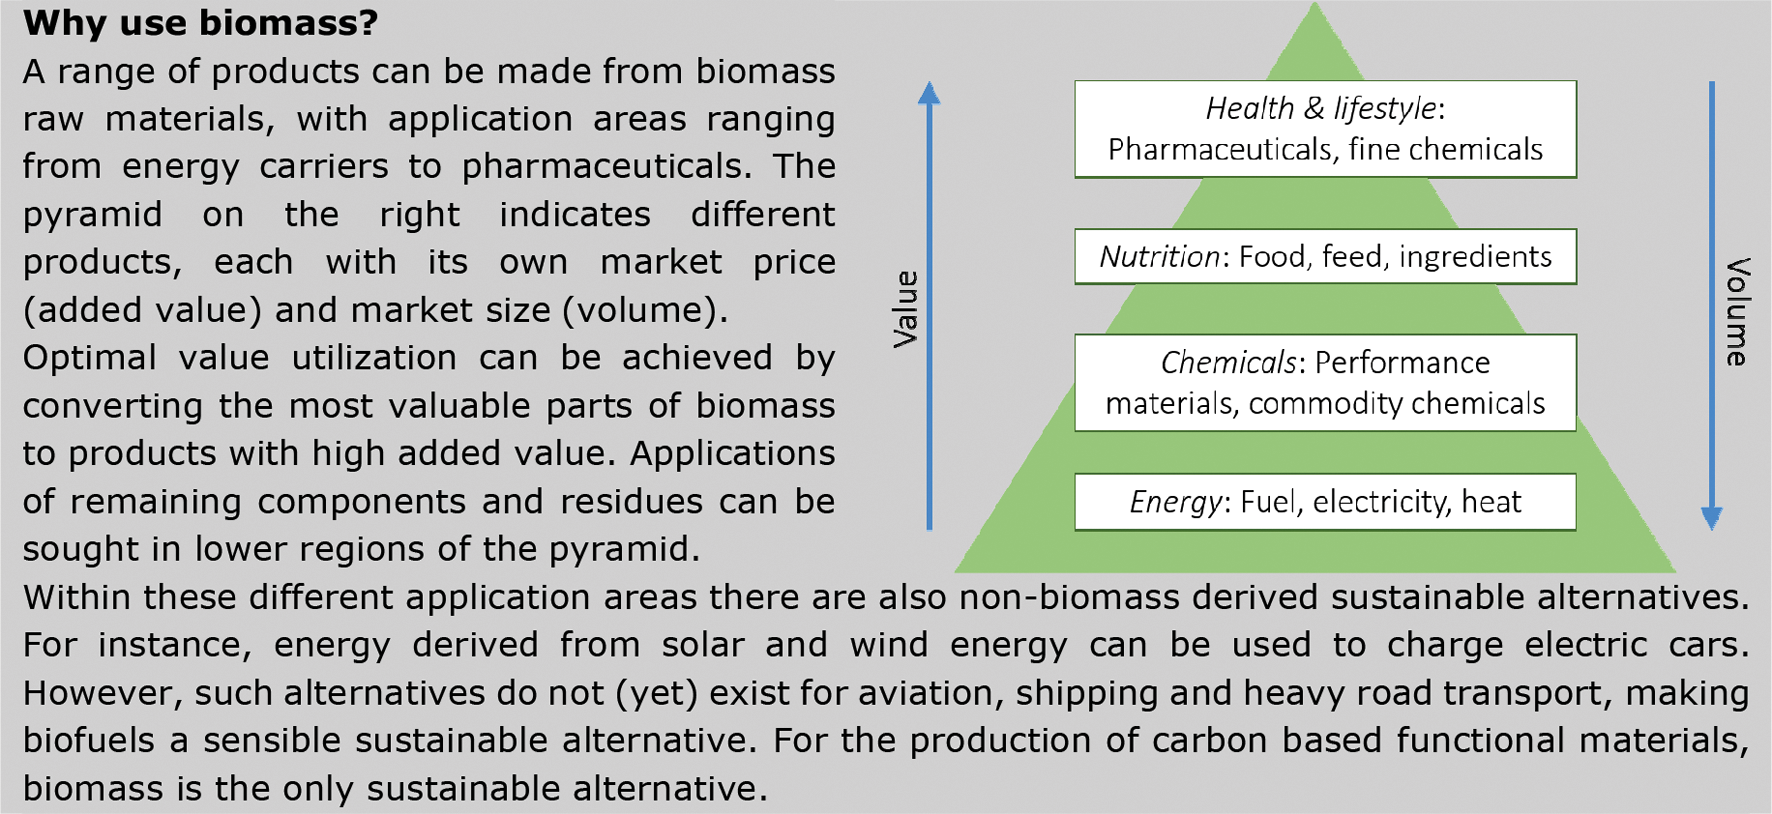 Text box 1 Application areas and economic value of biomass derived products.